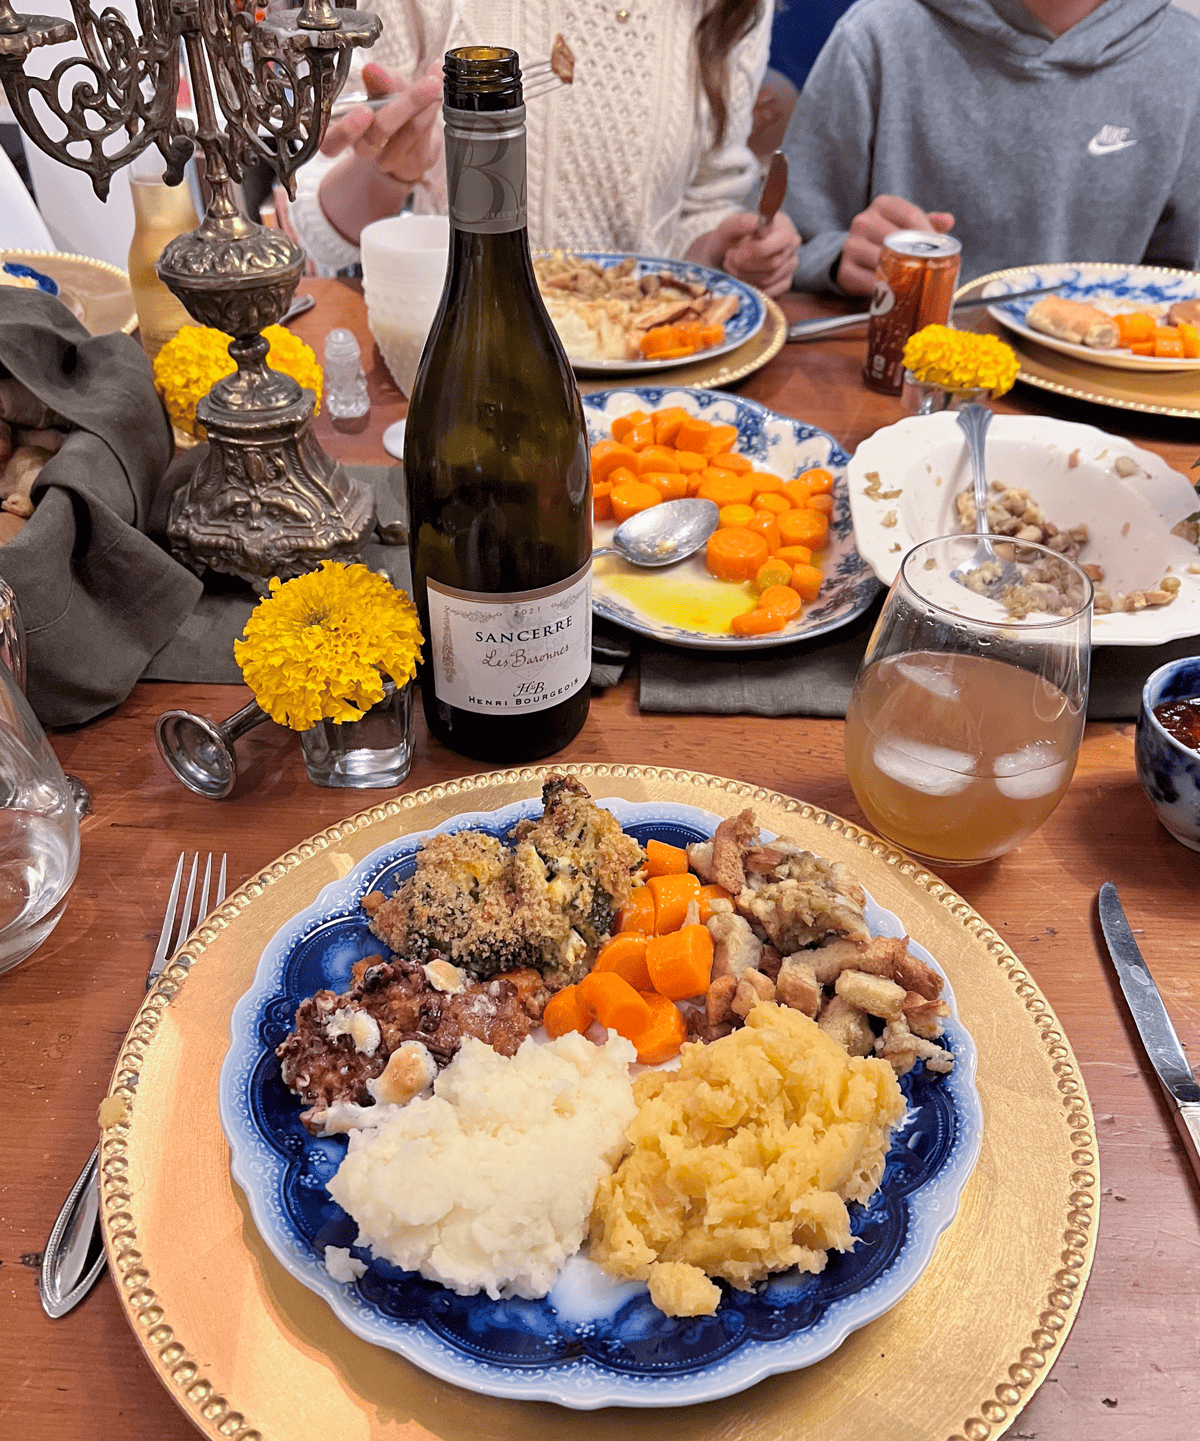 The vegetarians plate at thanksgiving dinner is full with mashed potatoes, rutabaga, sweet potato casserole, fresh carrots, stuffing (cooked outside of the turkey) and a bottle of Sancerre wine.
